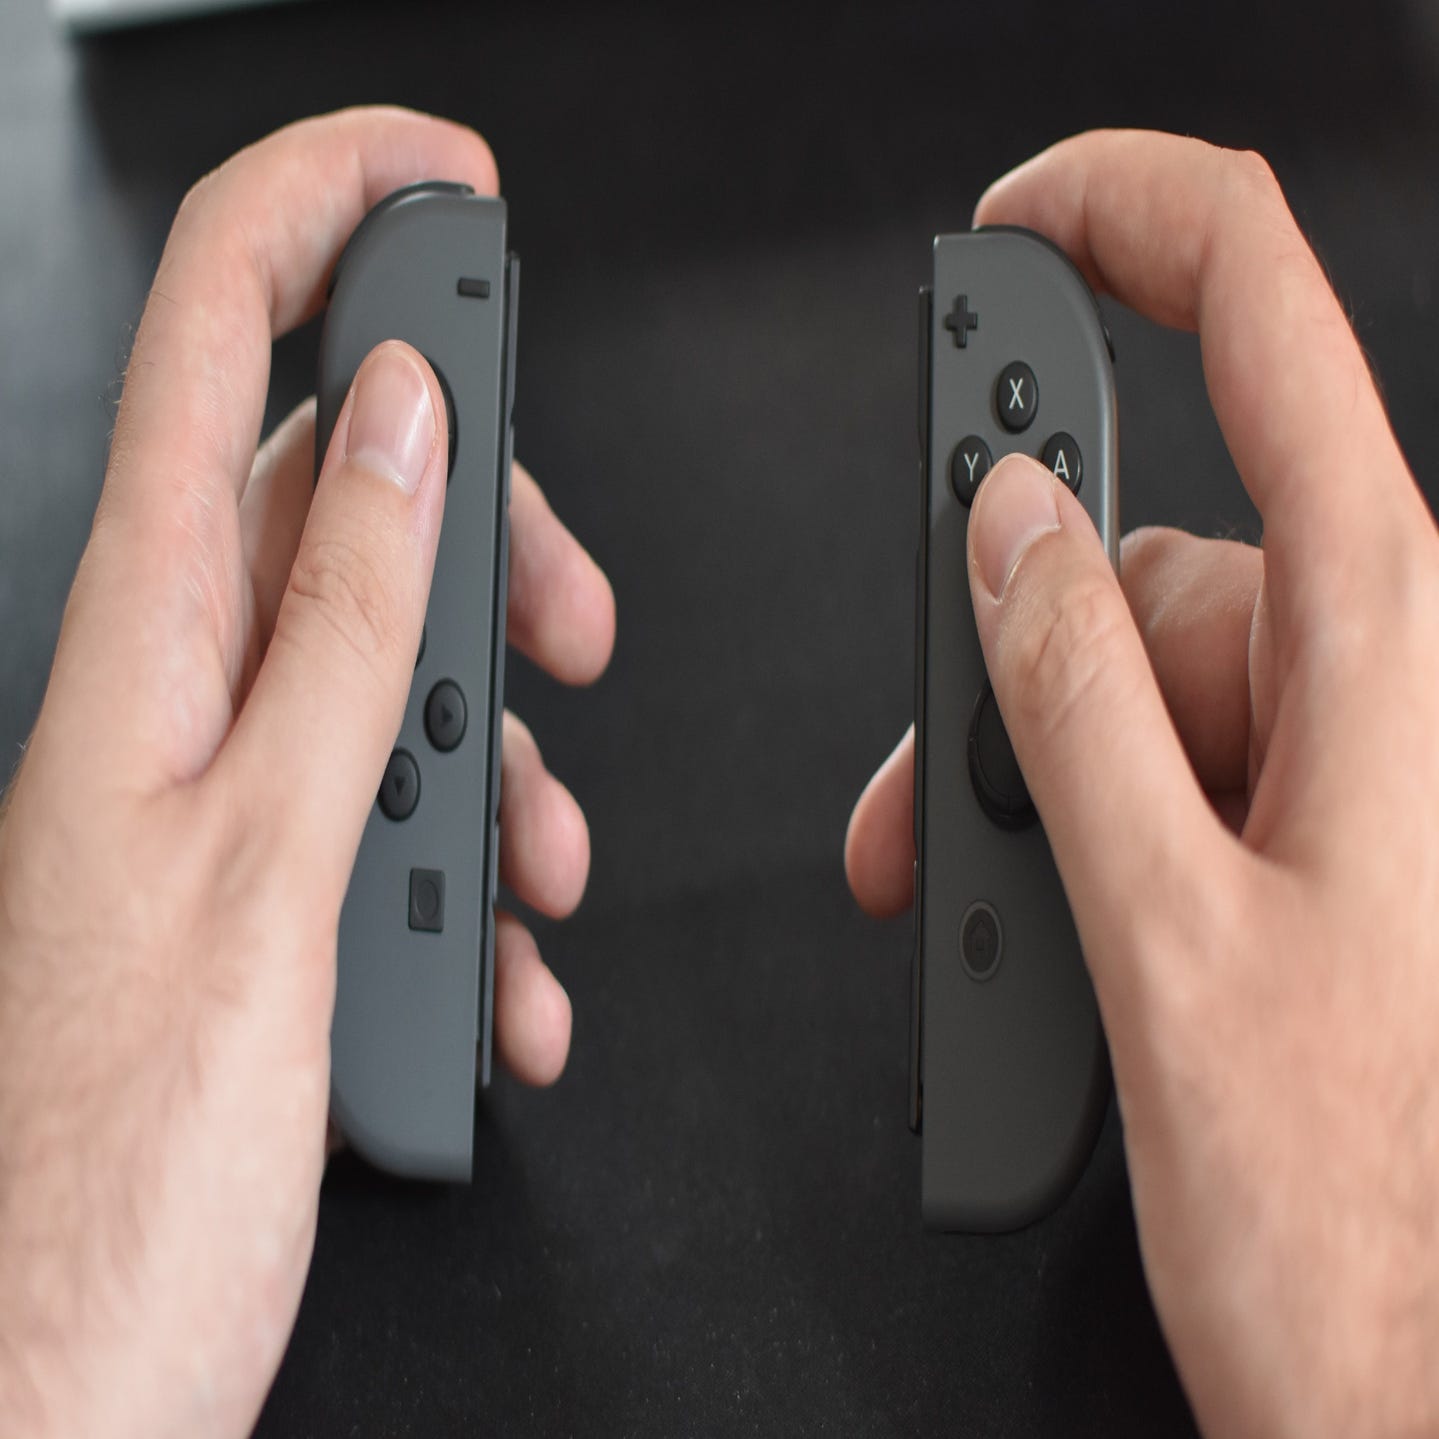 How to Use Nintendo Switch Joy-Cons on PC and Mac